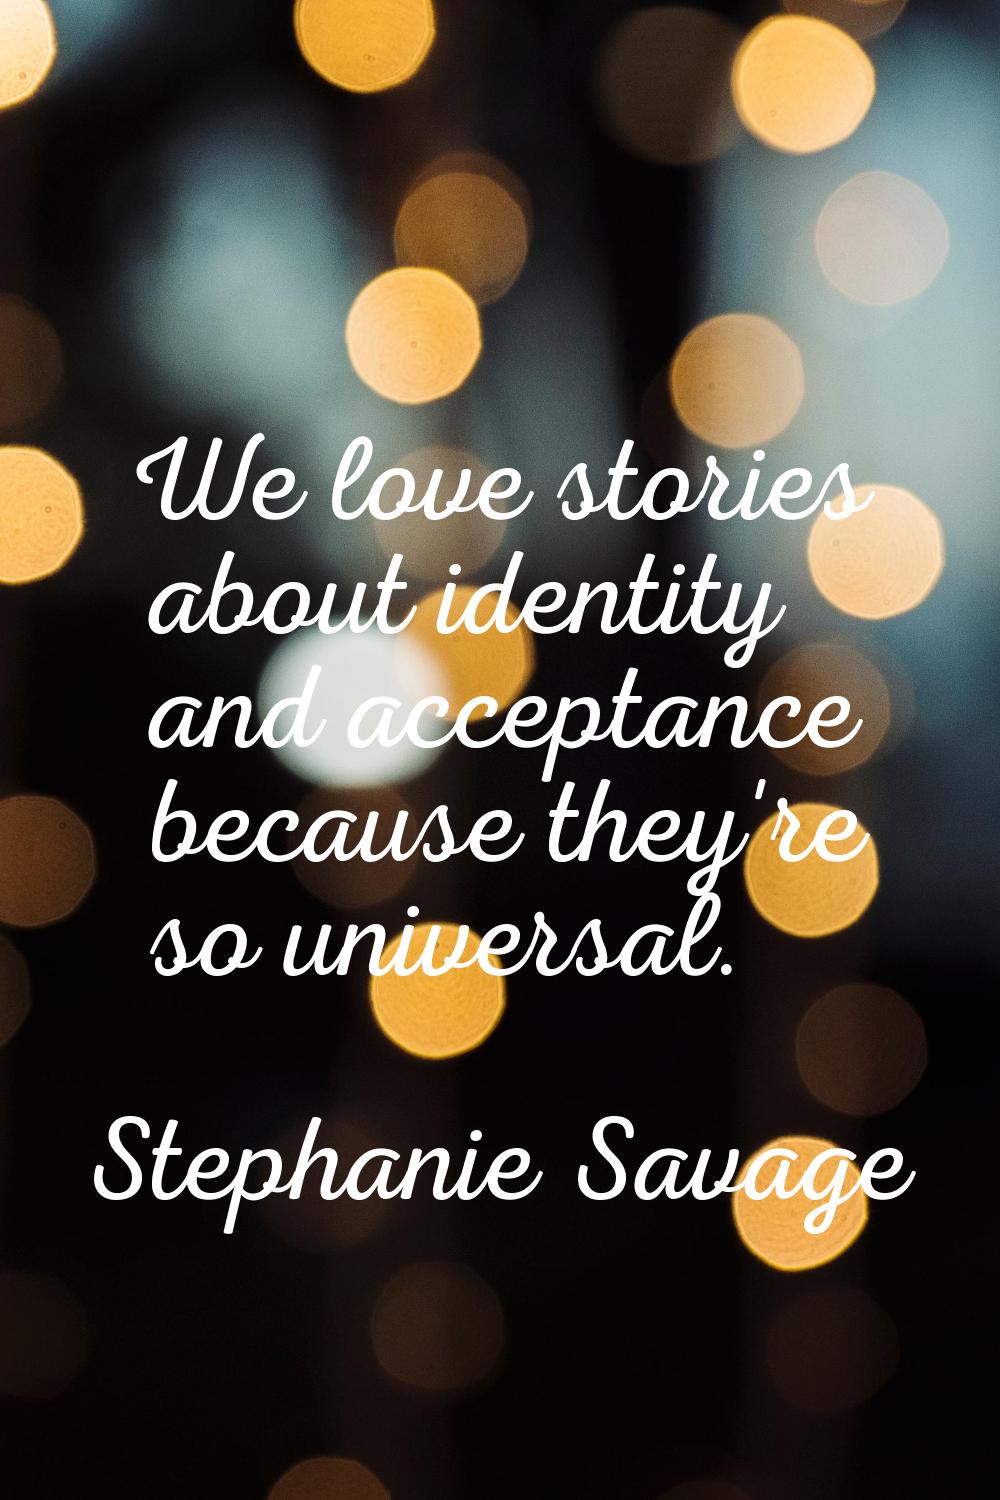 We love stories about identity and acceptance because they're so universal.